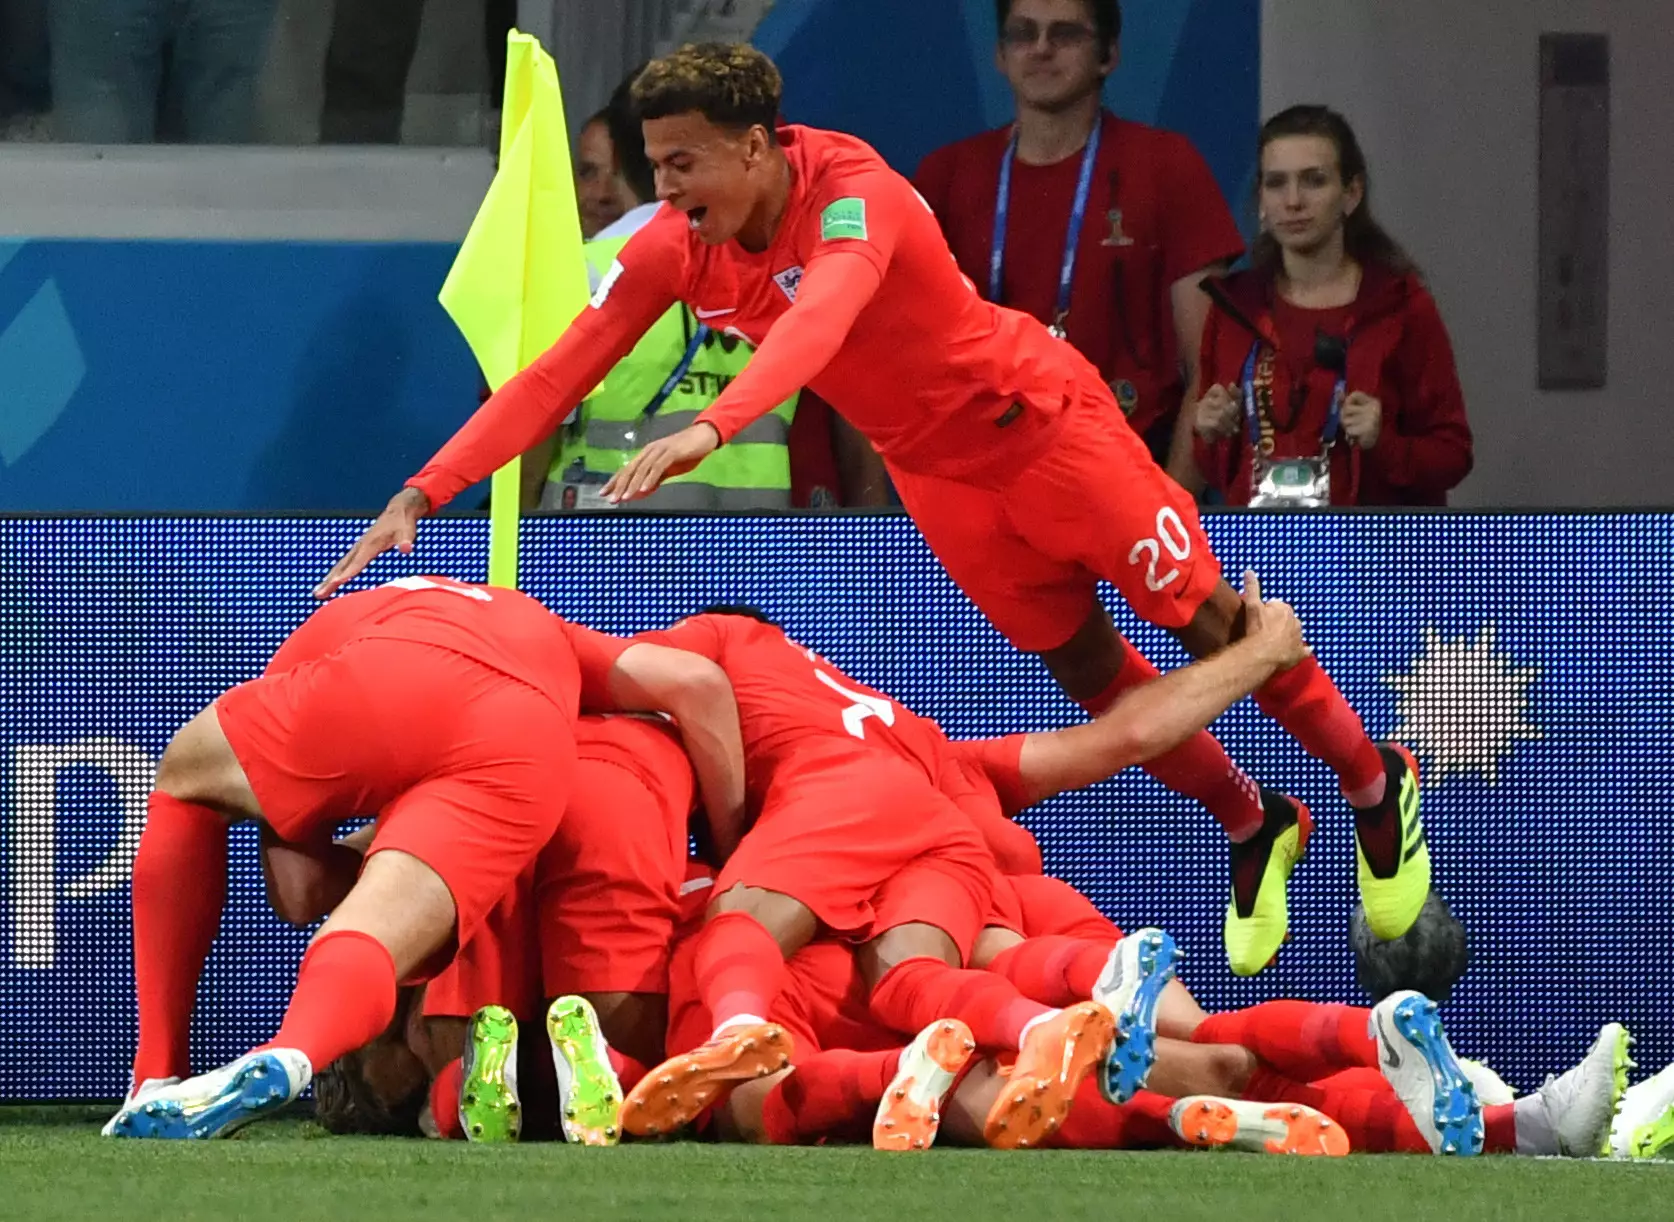 England celebrate their World Cup opening goal. Image; PA Images